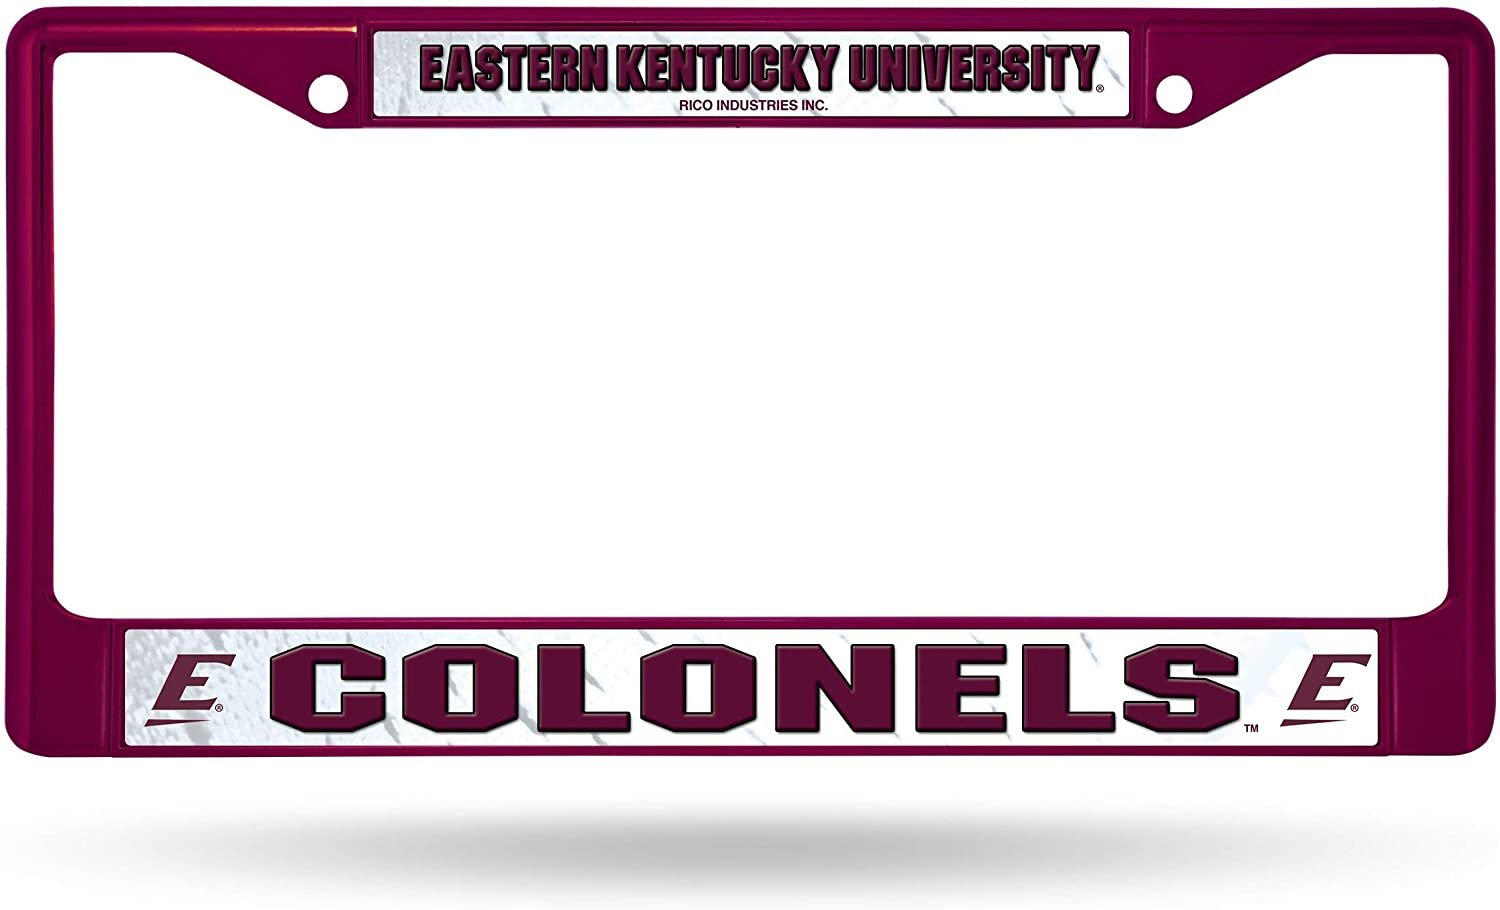 Eastern Kentucky University Colonels Premium Metal License Plate Frame Chrome Tag Cover, 12x6 Inch